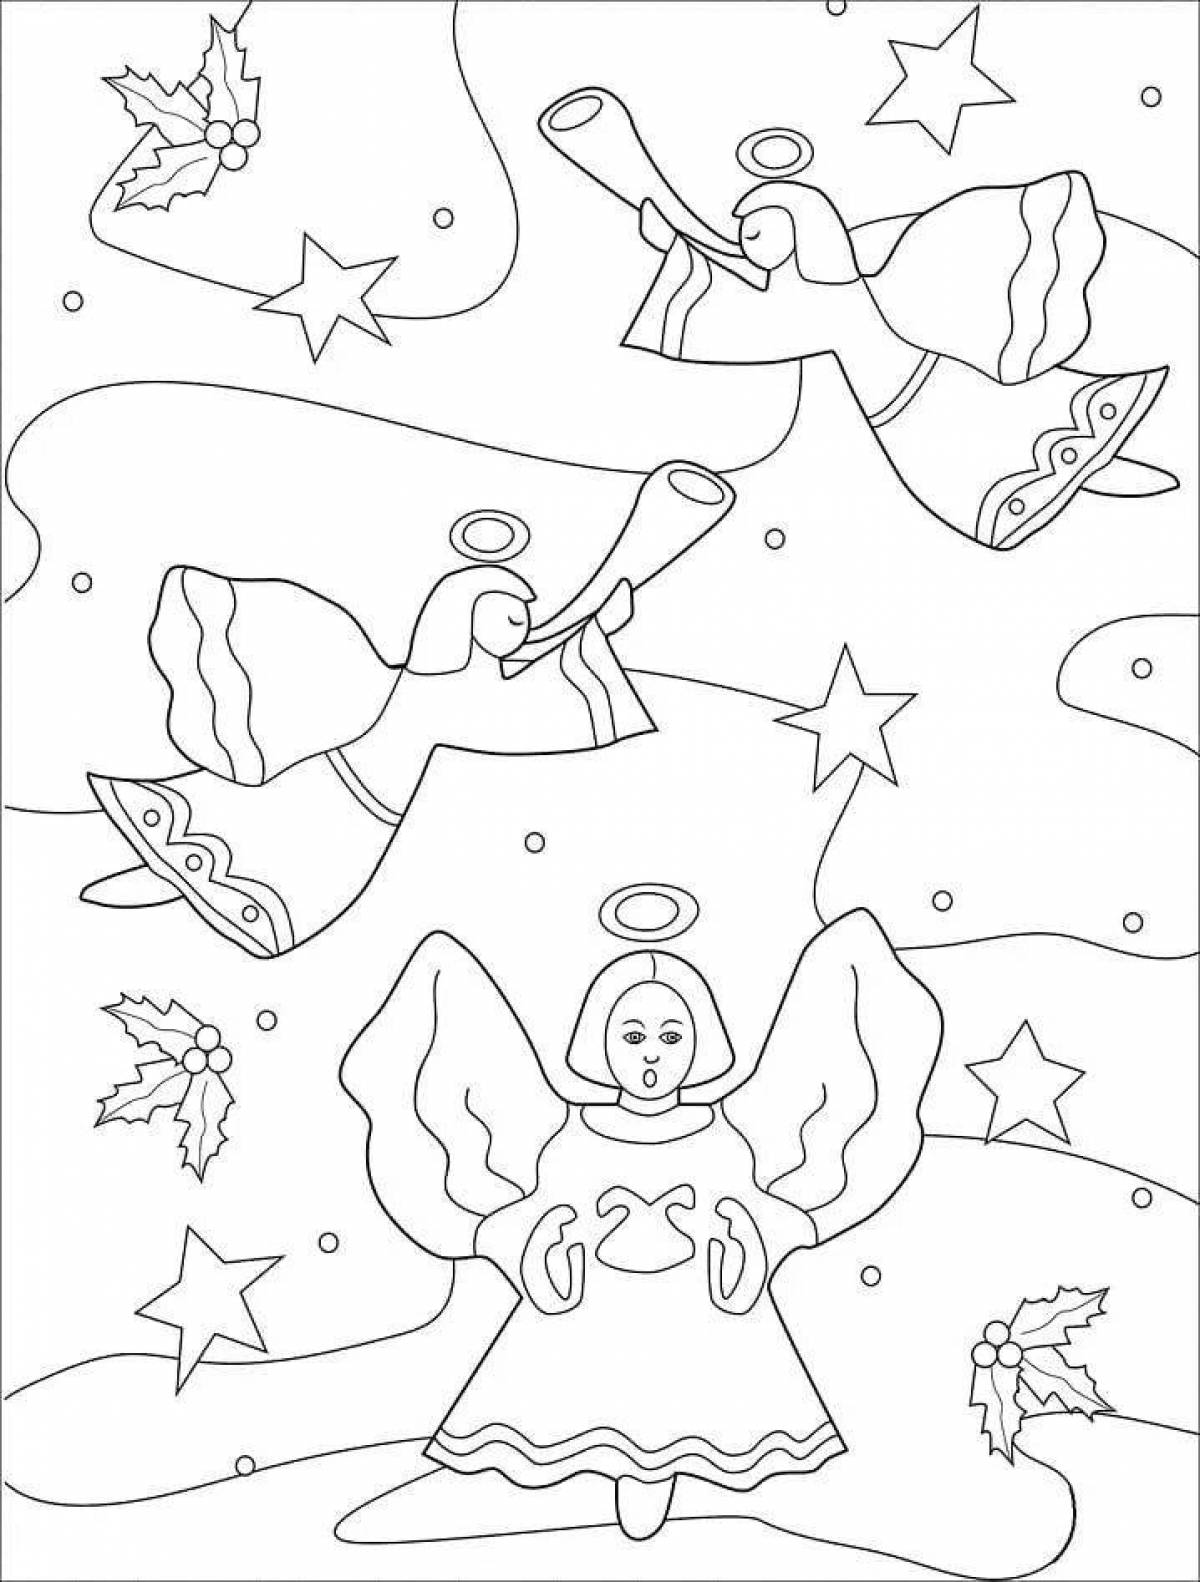 Celestial christmas angel coloring book for kids